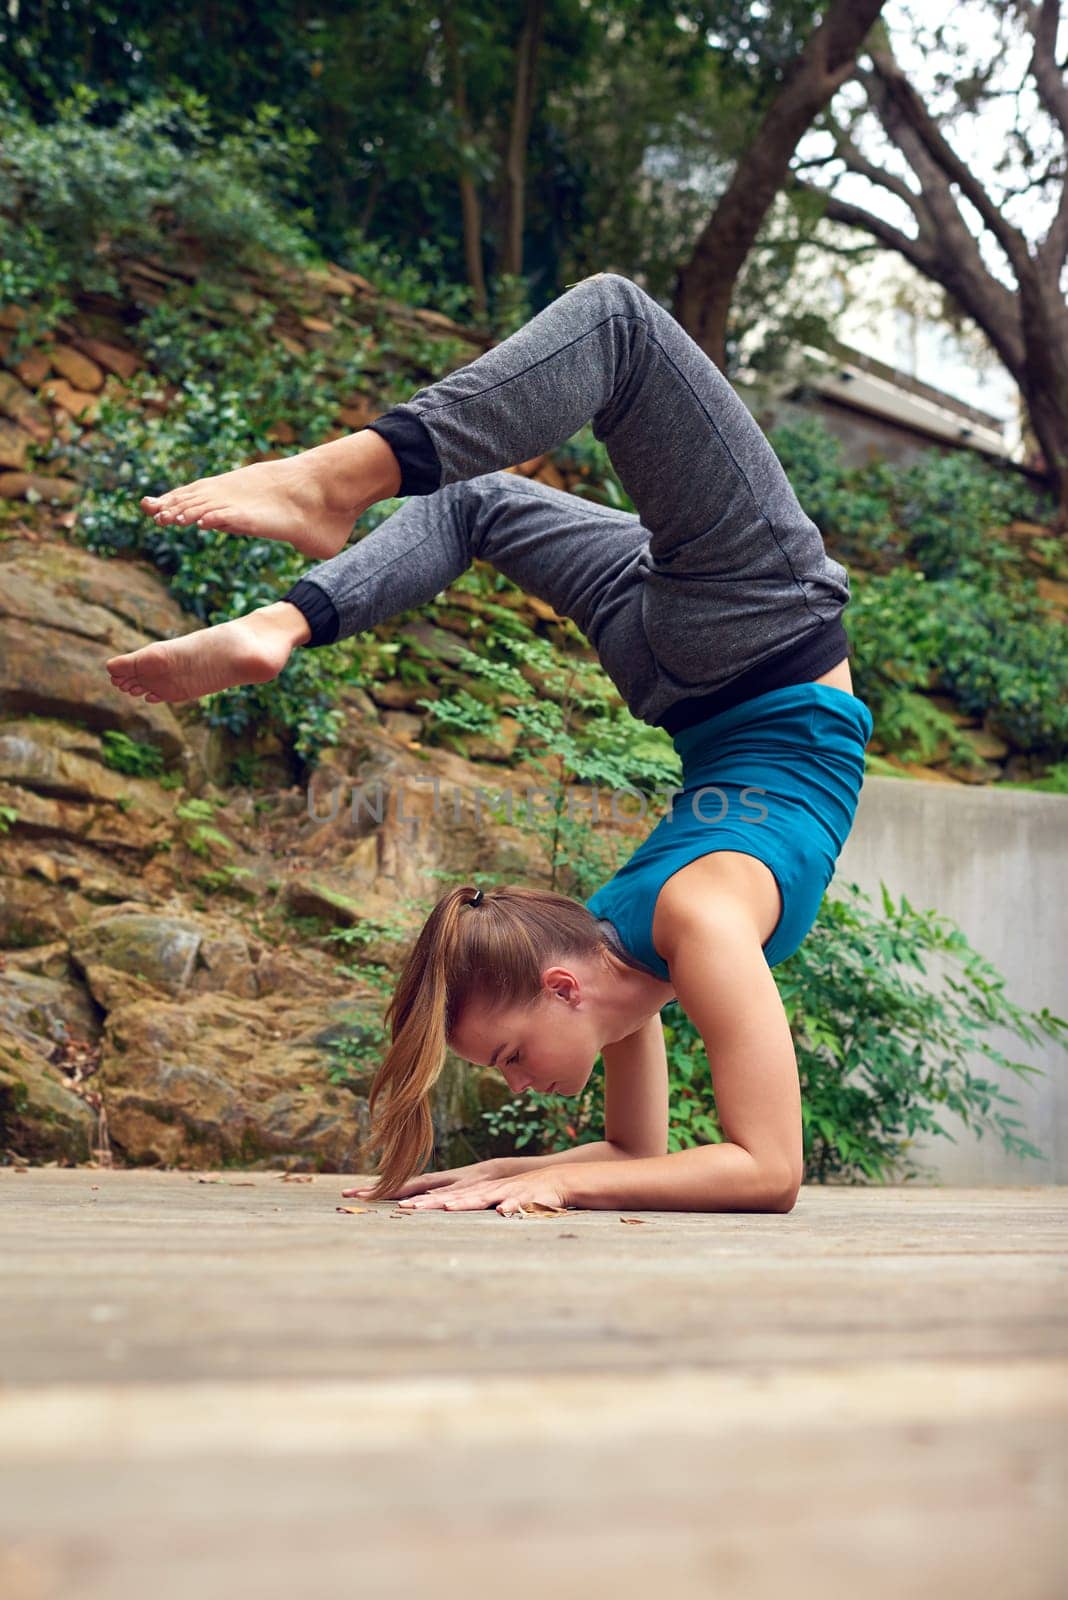 Looking at life from a different angle. a young woman practicing yoga outdoors